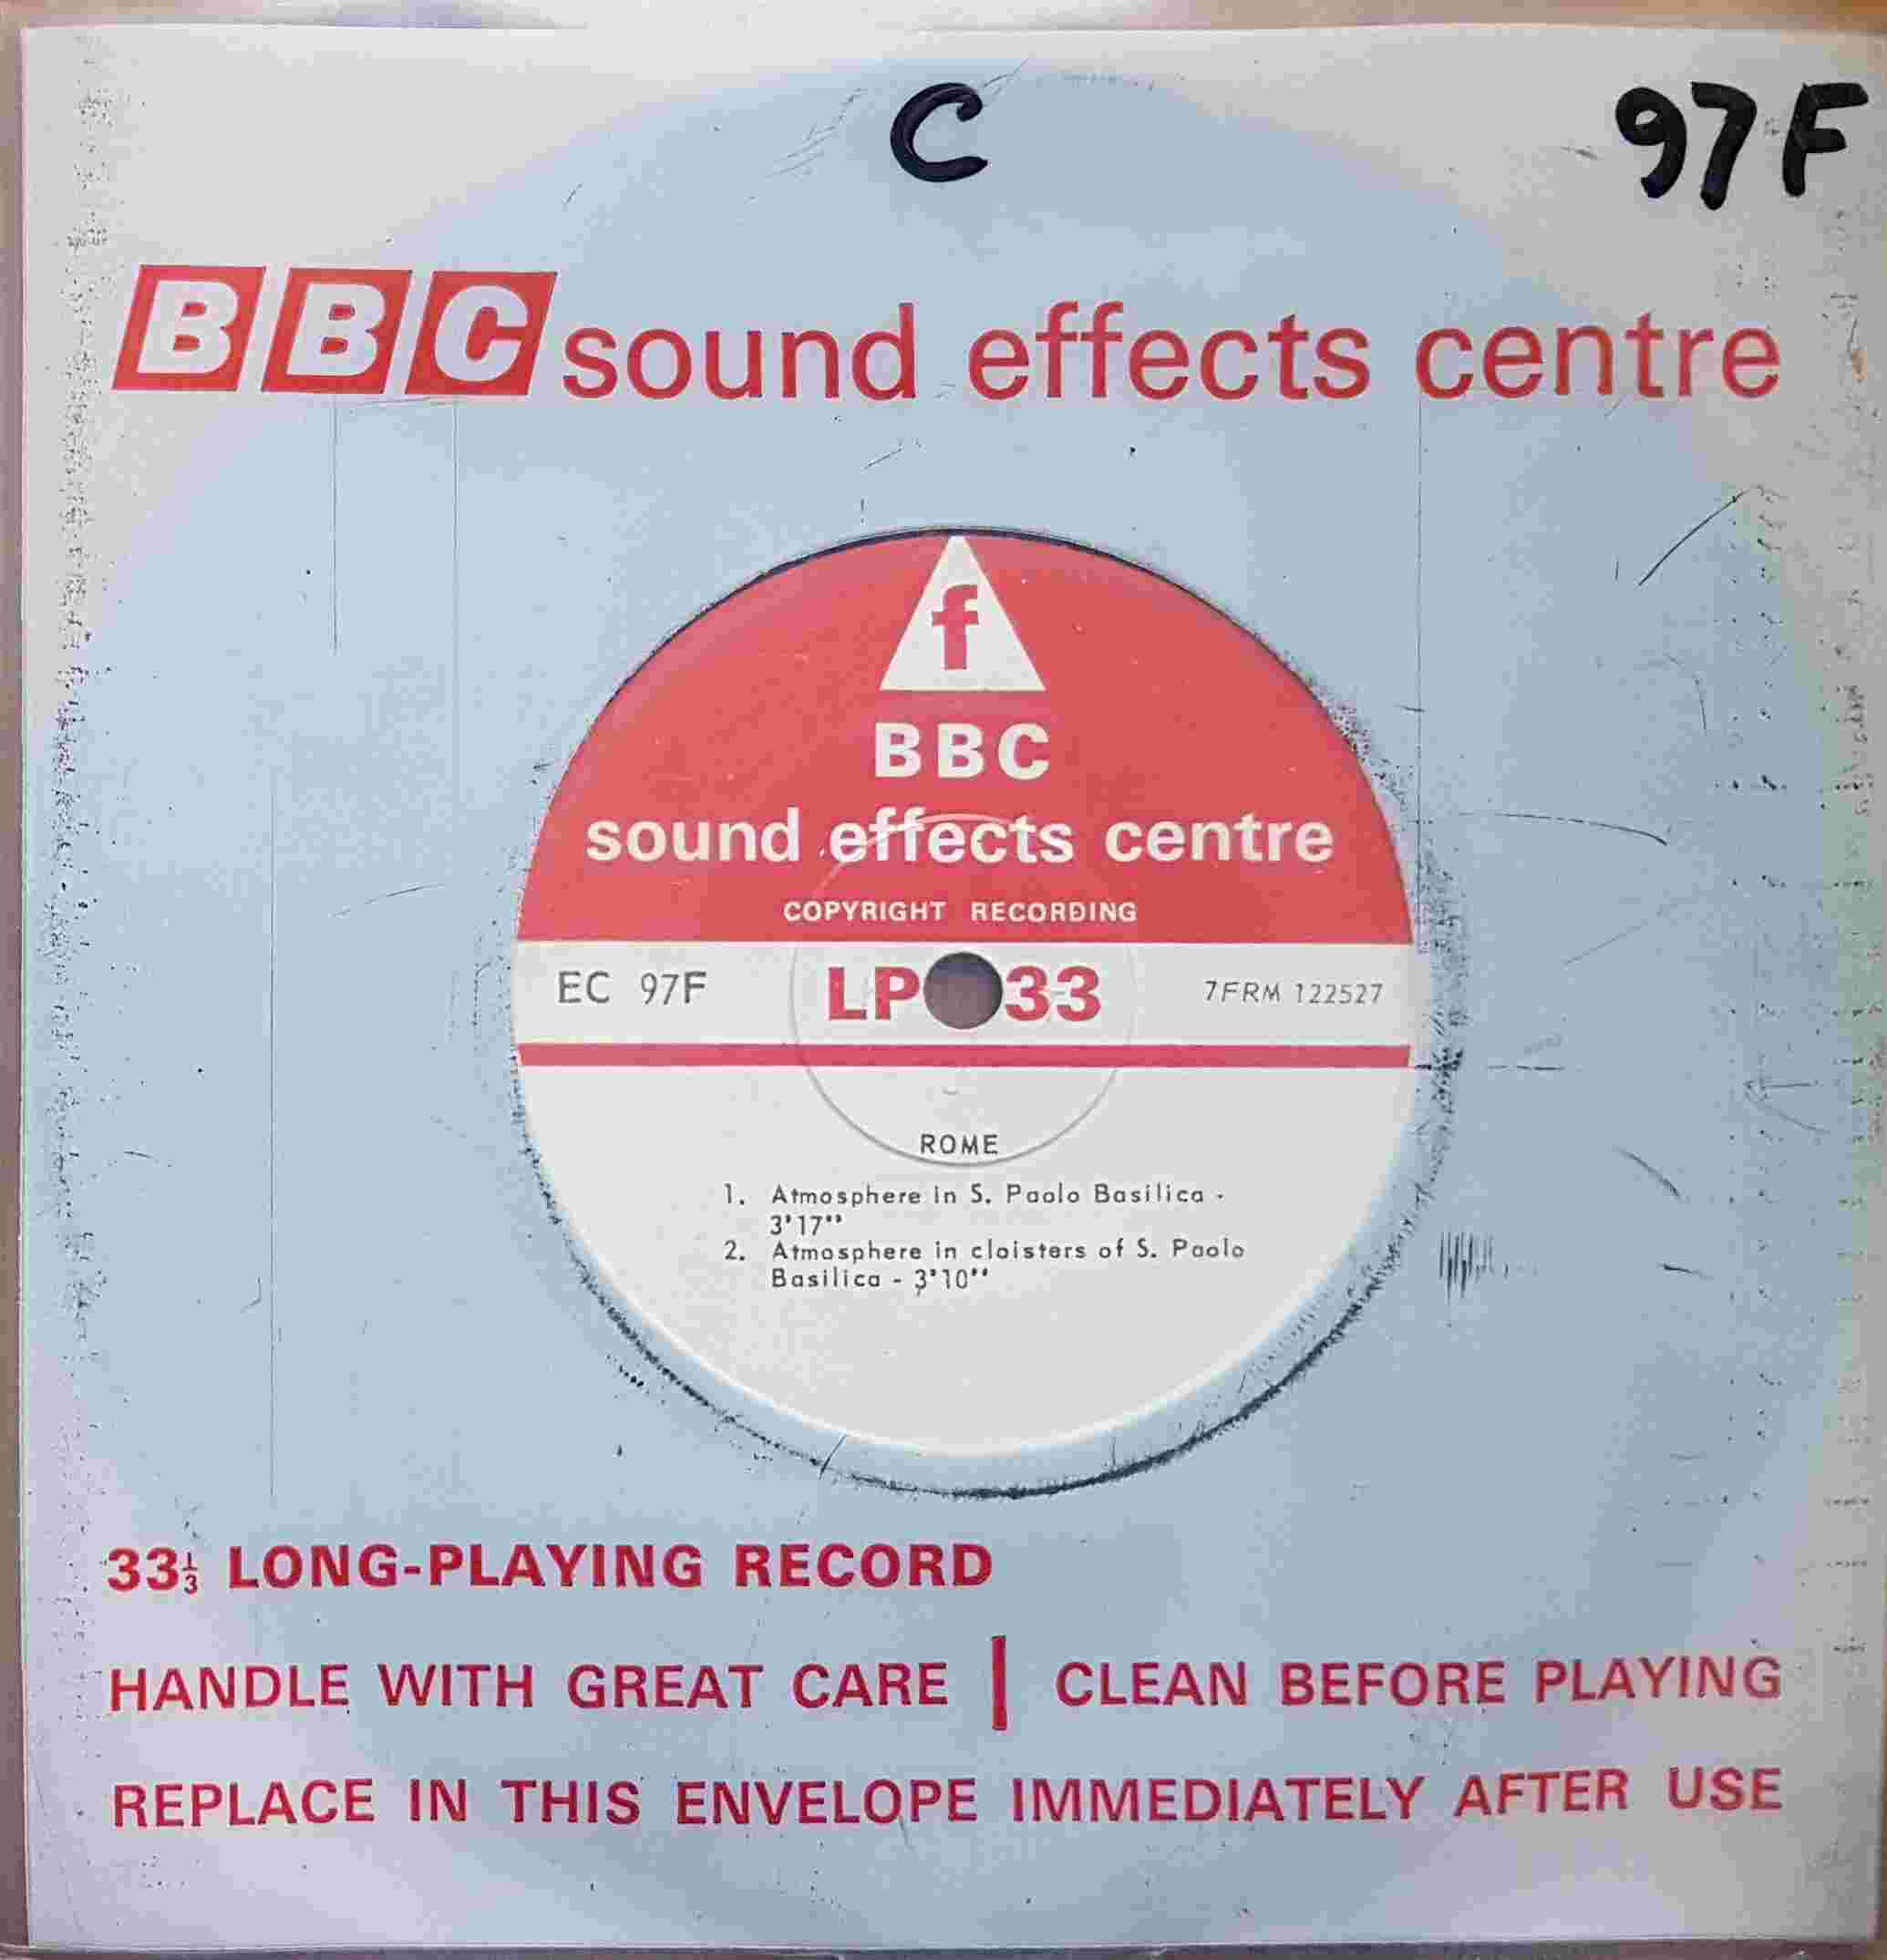 Picture of EC 97F Rome by artist Not registered from the BBC records and Tapes library